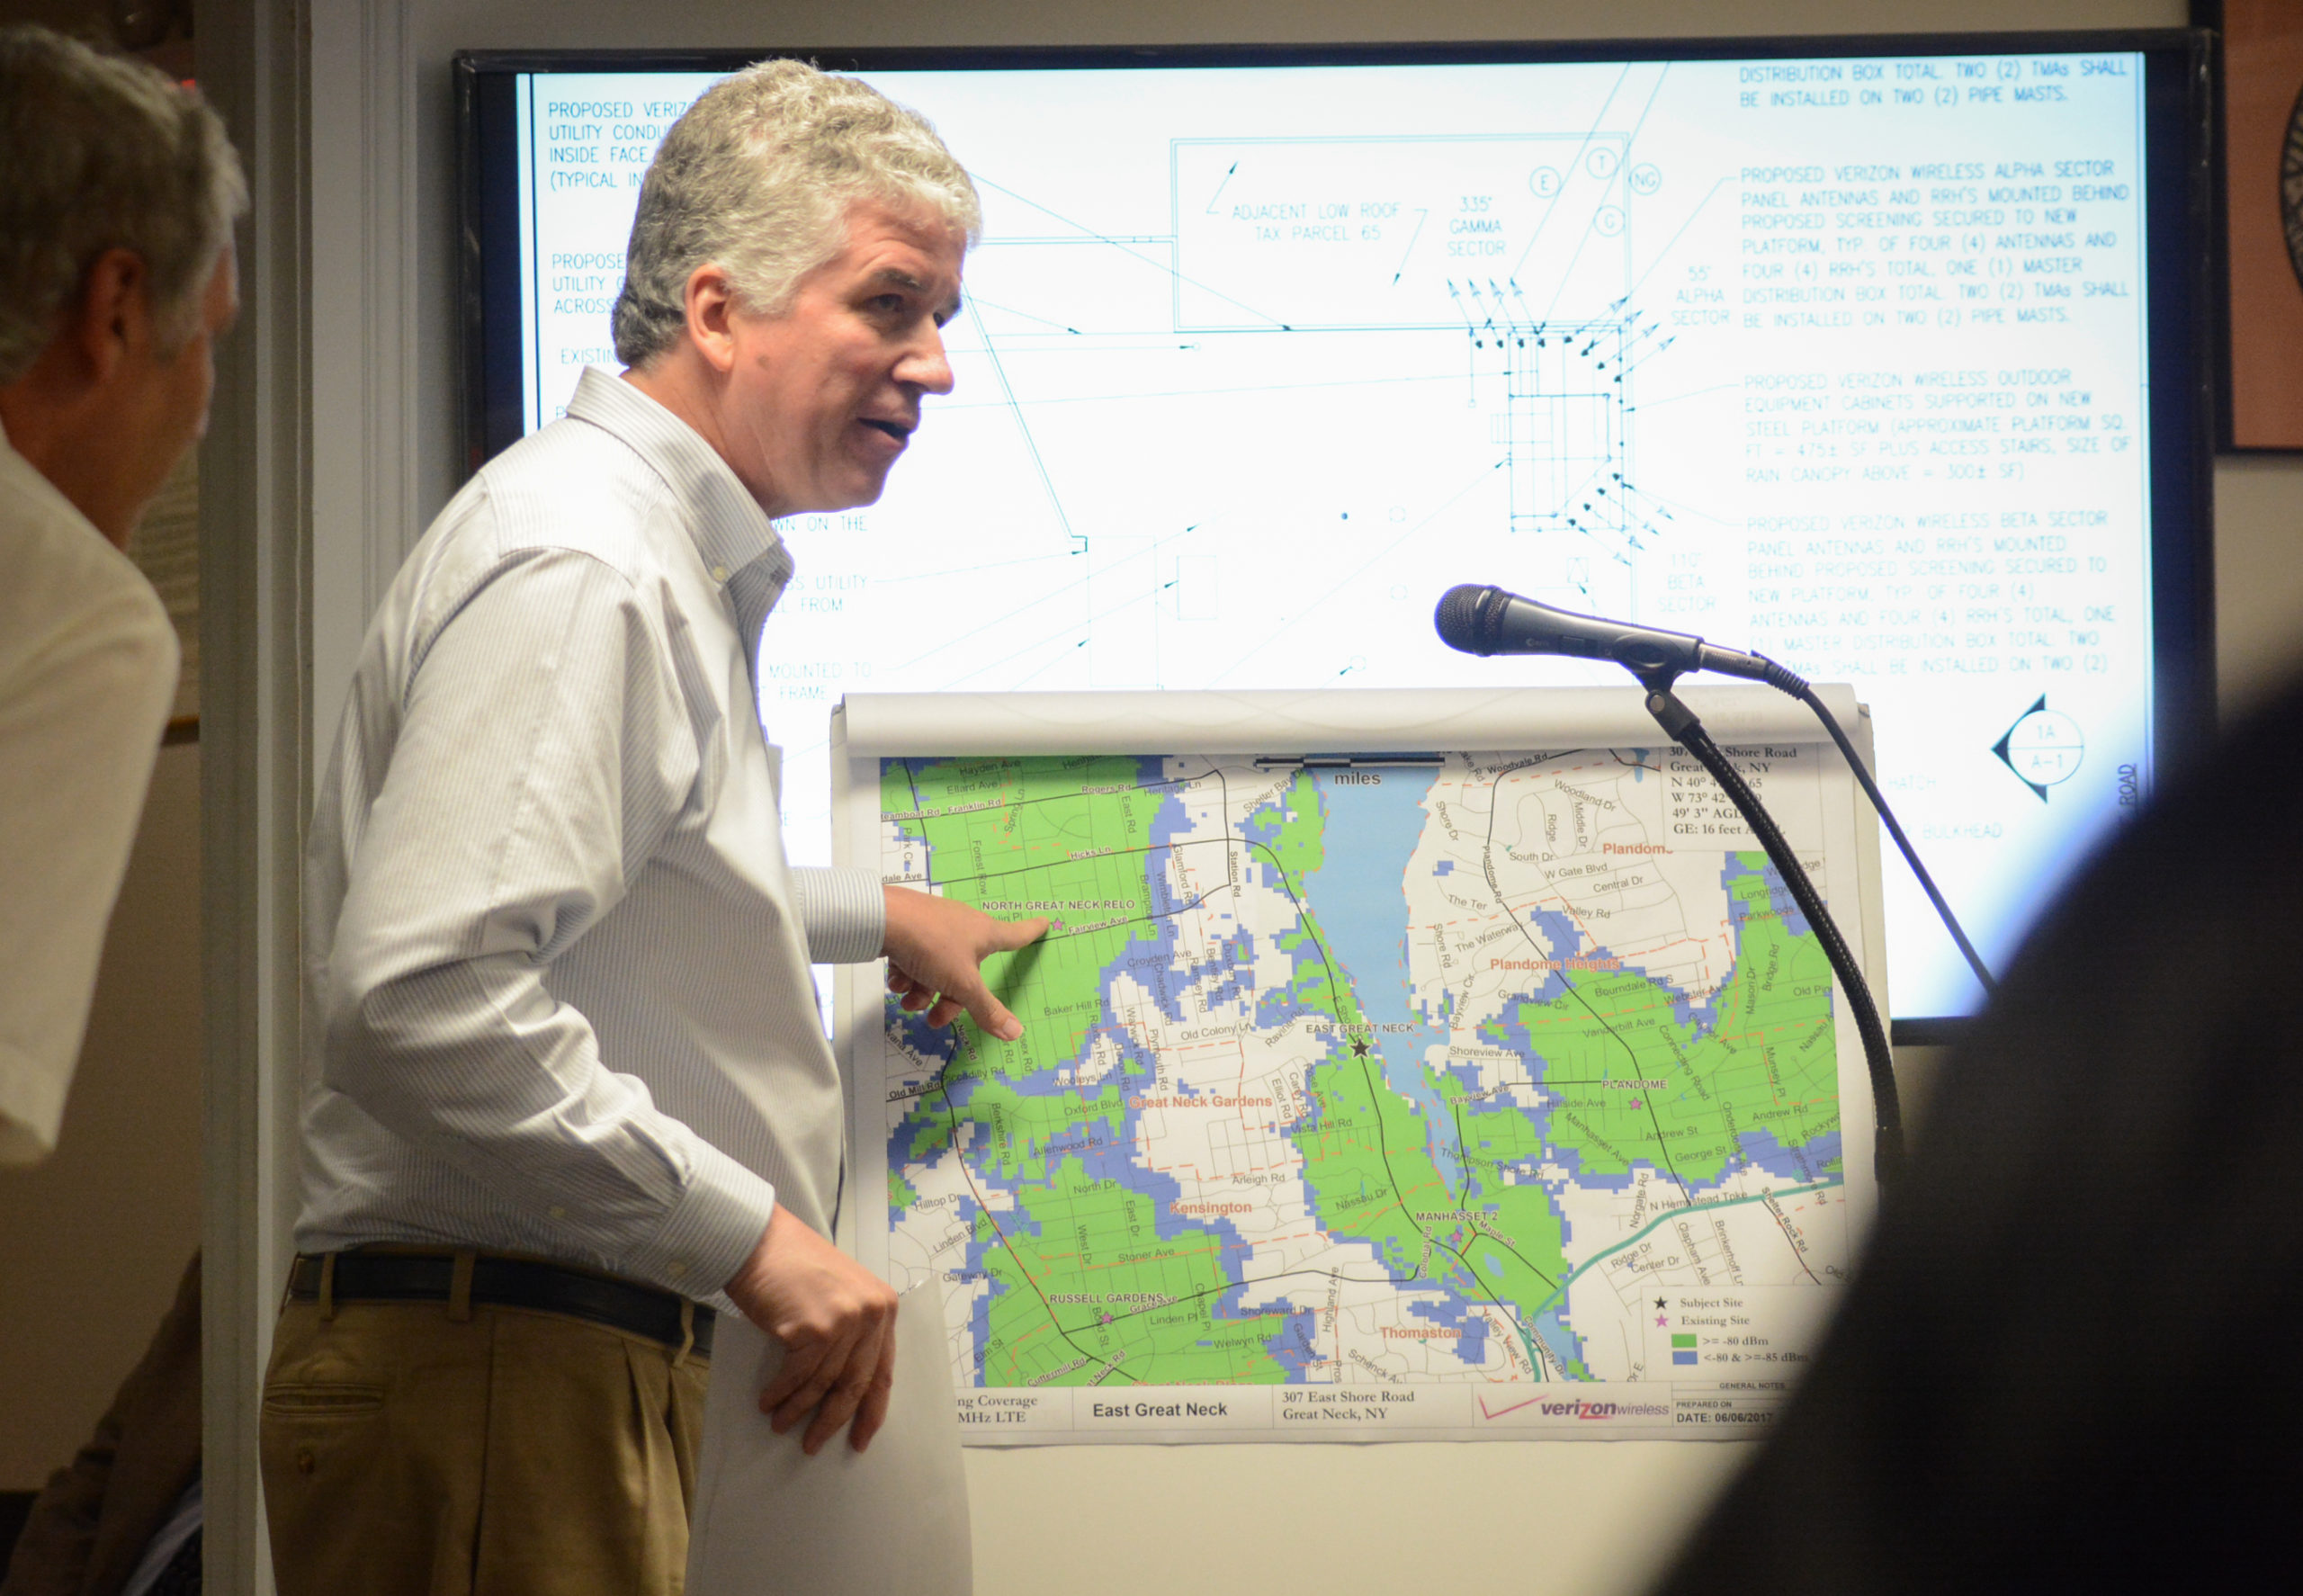 Martin Lavin, a radio frequency engineer with C-Squared Systems, gestures to coverage areas on a map. (Photo by Janelle Clausen)